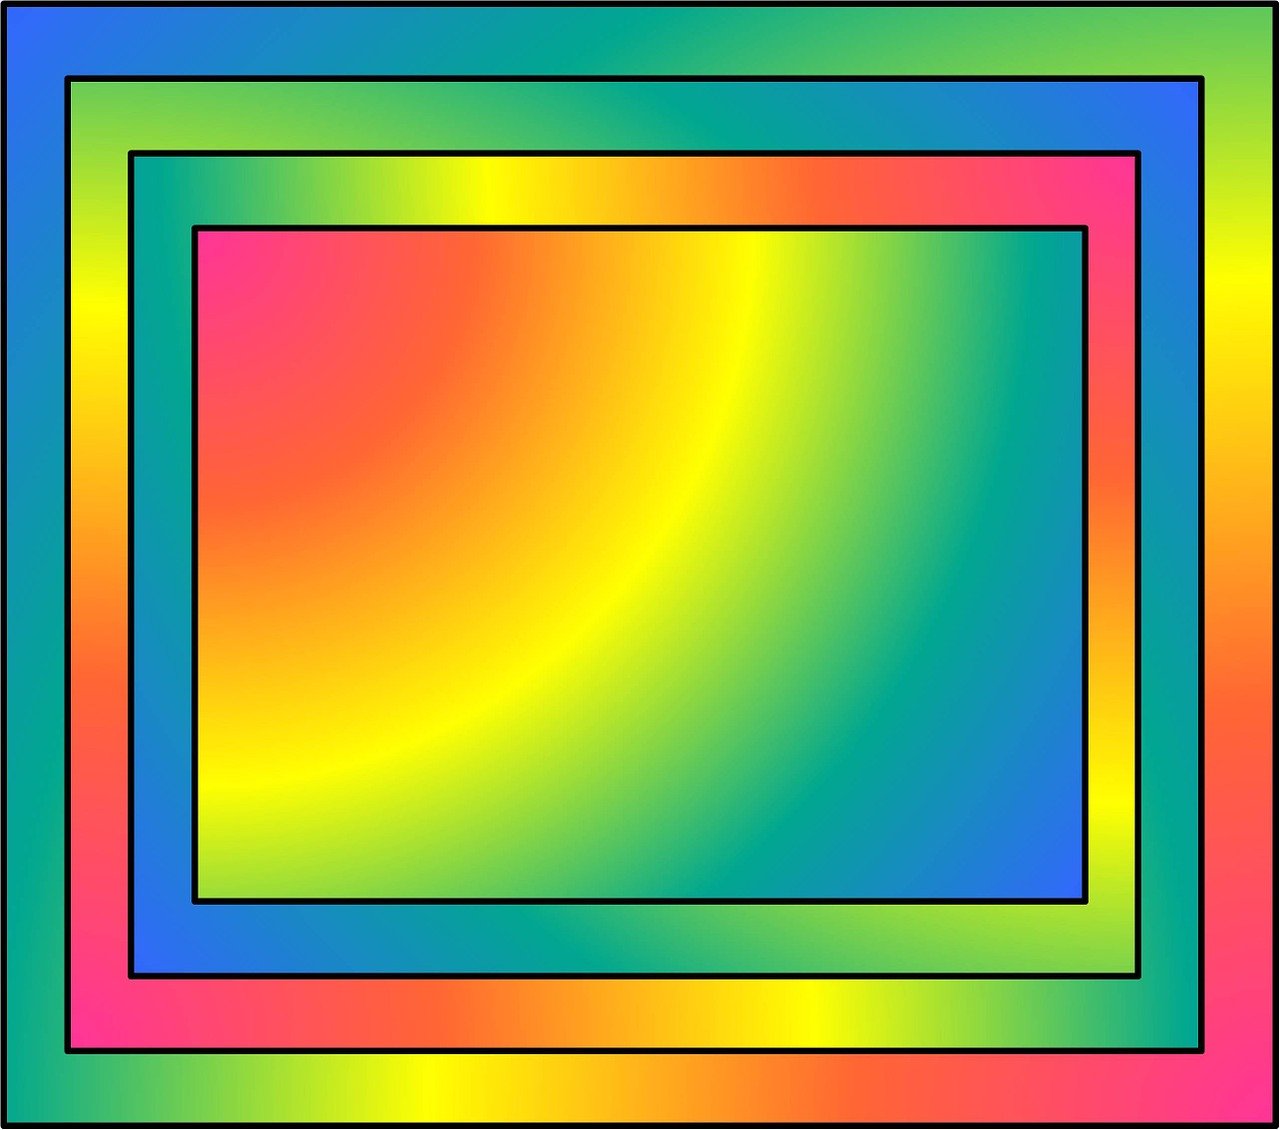 a rainbow colored square with a black border, a computer rendering, color field, multicolored vector art, frame around pciture, colorful and psychedelic, 3 colour